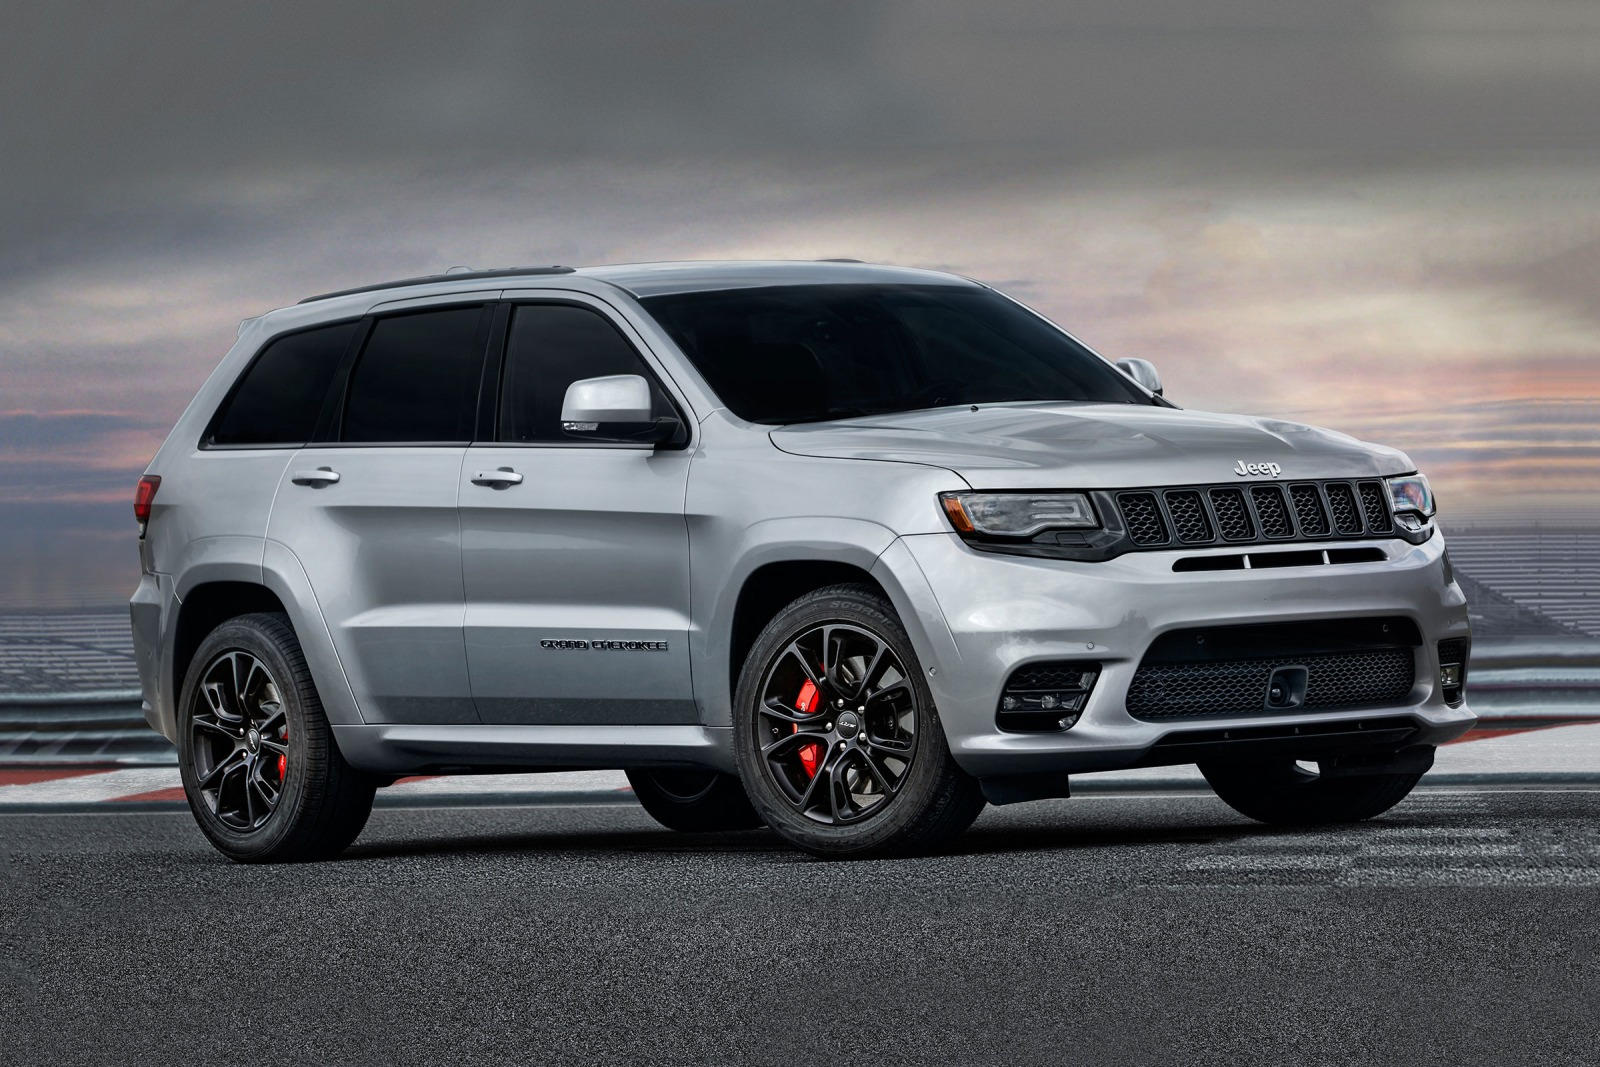 Used 2018 Jeep Grand Cherokee SRT For Sale Near Me | CarBuzz